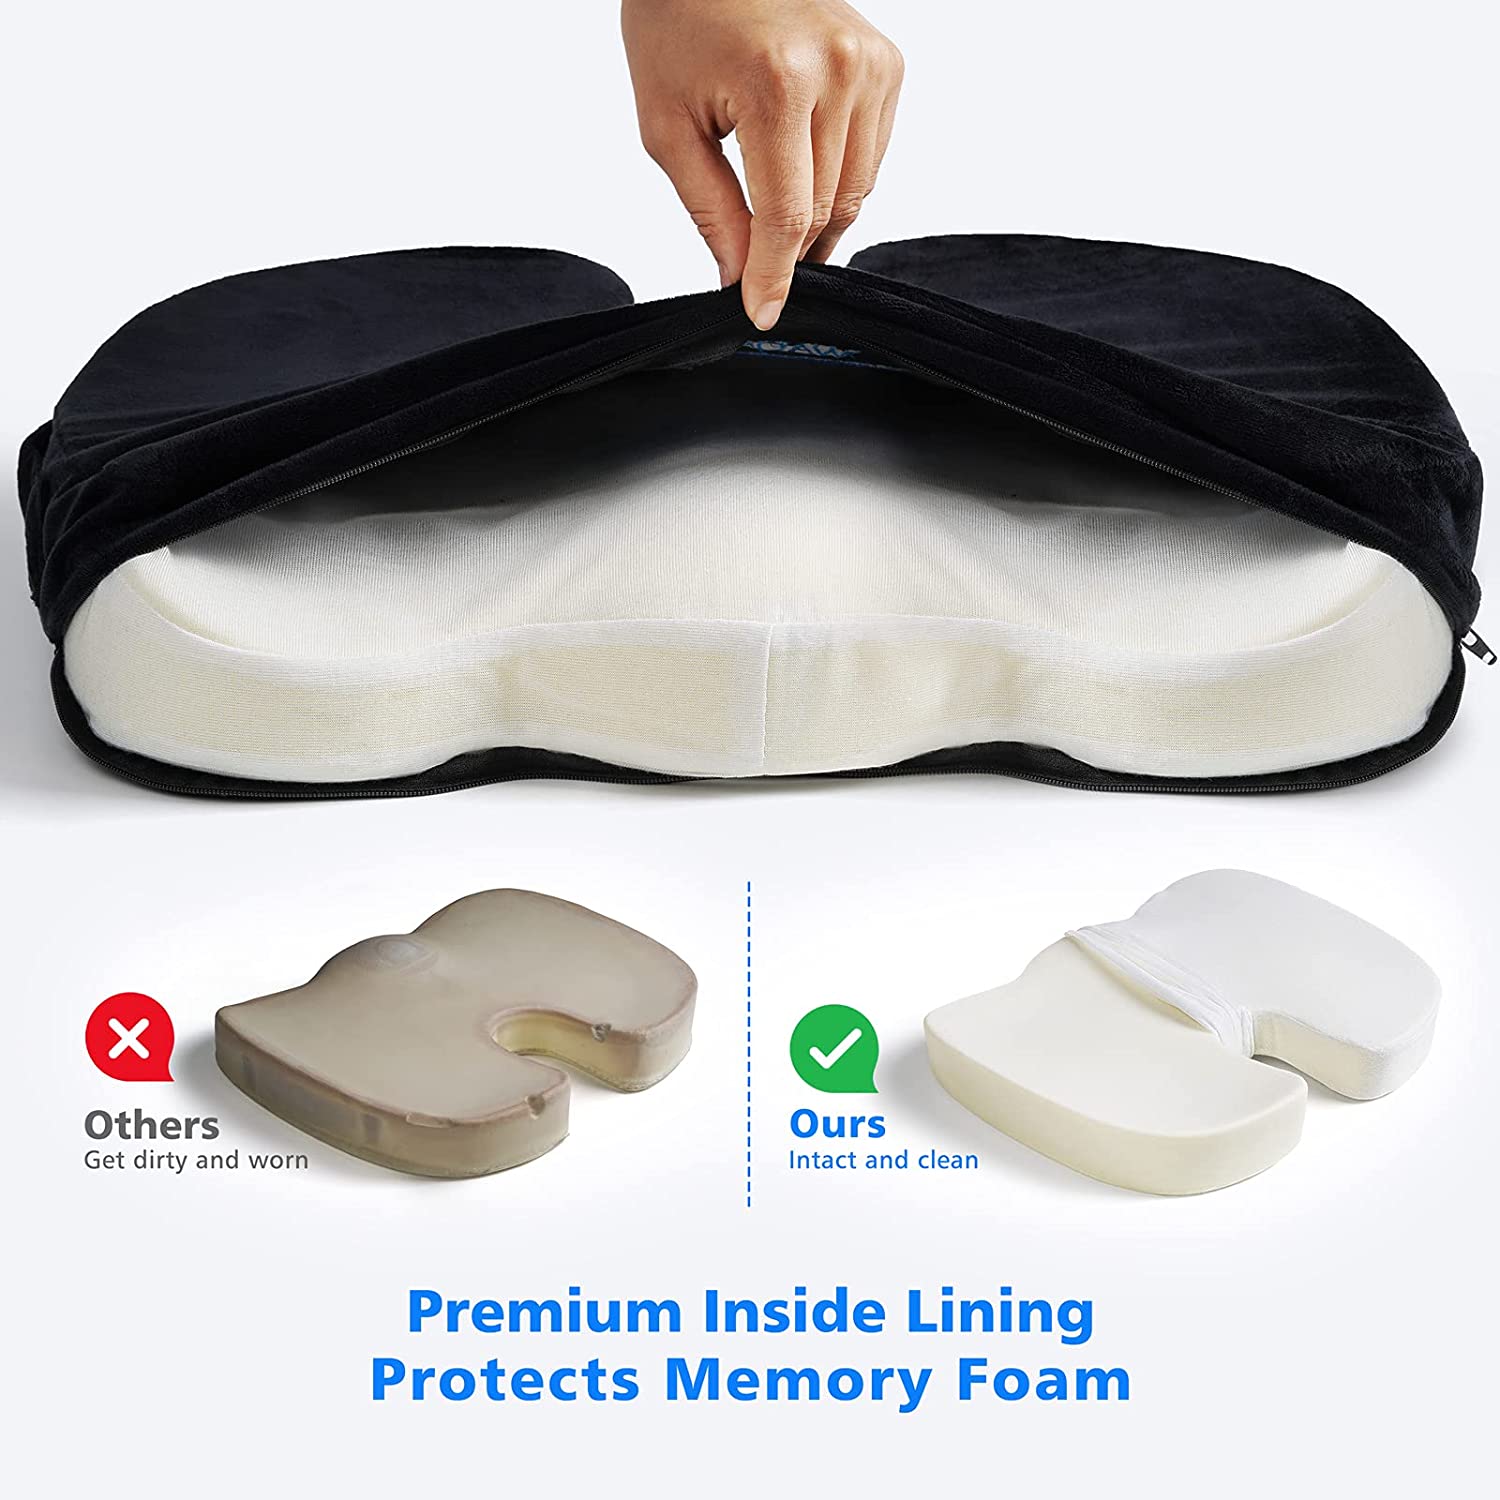 https://discounttoday.net/wp-content/uploads/2022/09/WAOAW-Seat-Cushion-Office-Chair-Cushions-Butt-Pillow-for-Long-Sitting-Memory-Foam-Chair-Pad-for-Back-Coccyx-Tailbone-Pain-Relief2.jpg